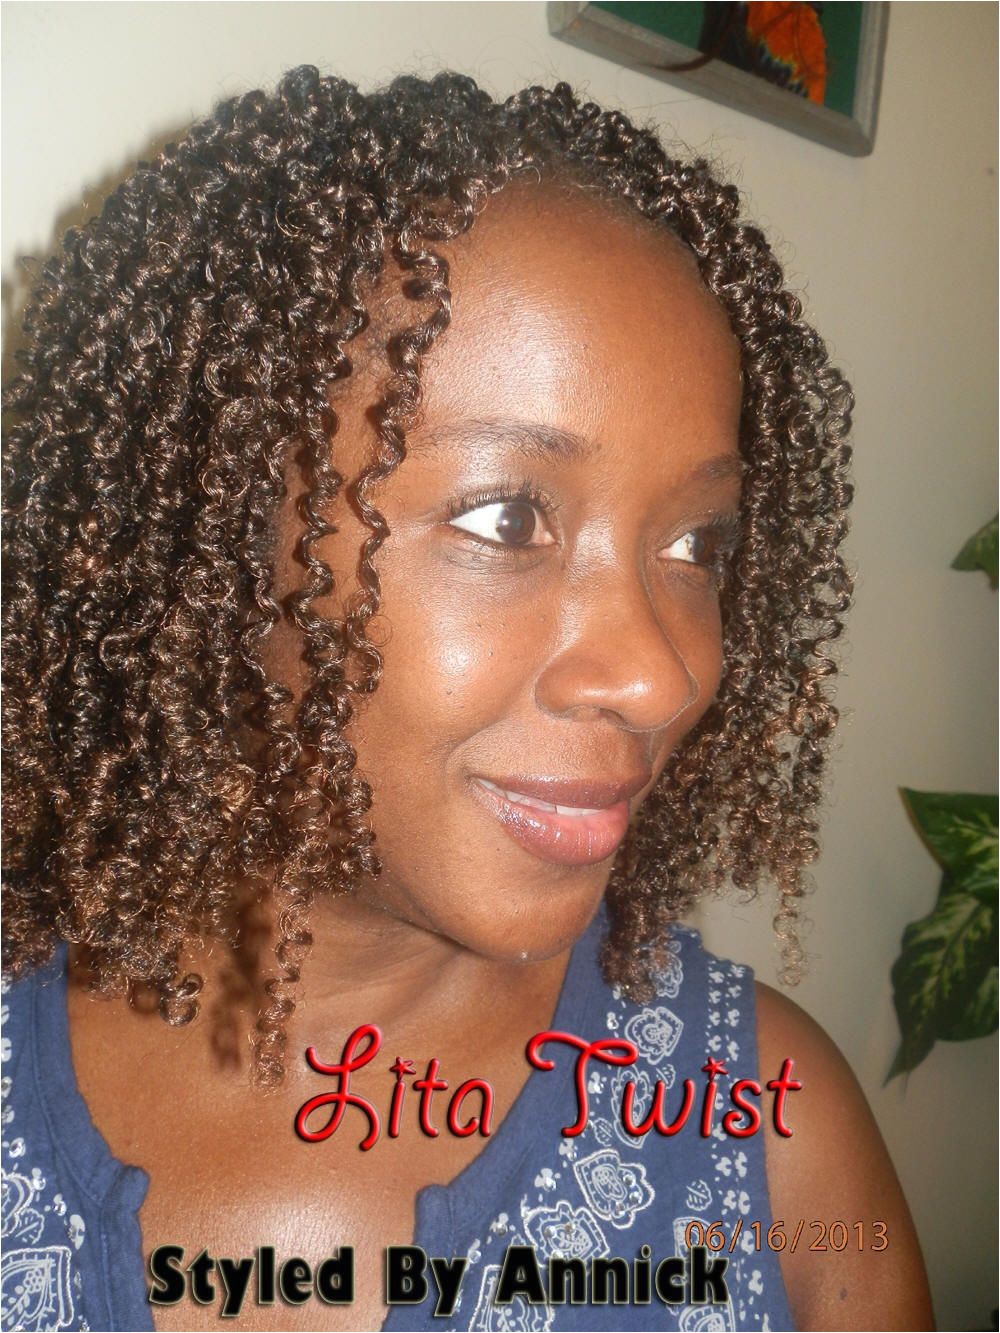 Lita Twists using Afro Coil or spring twist hair